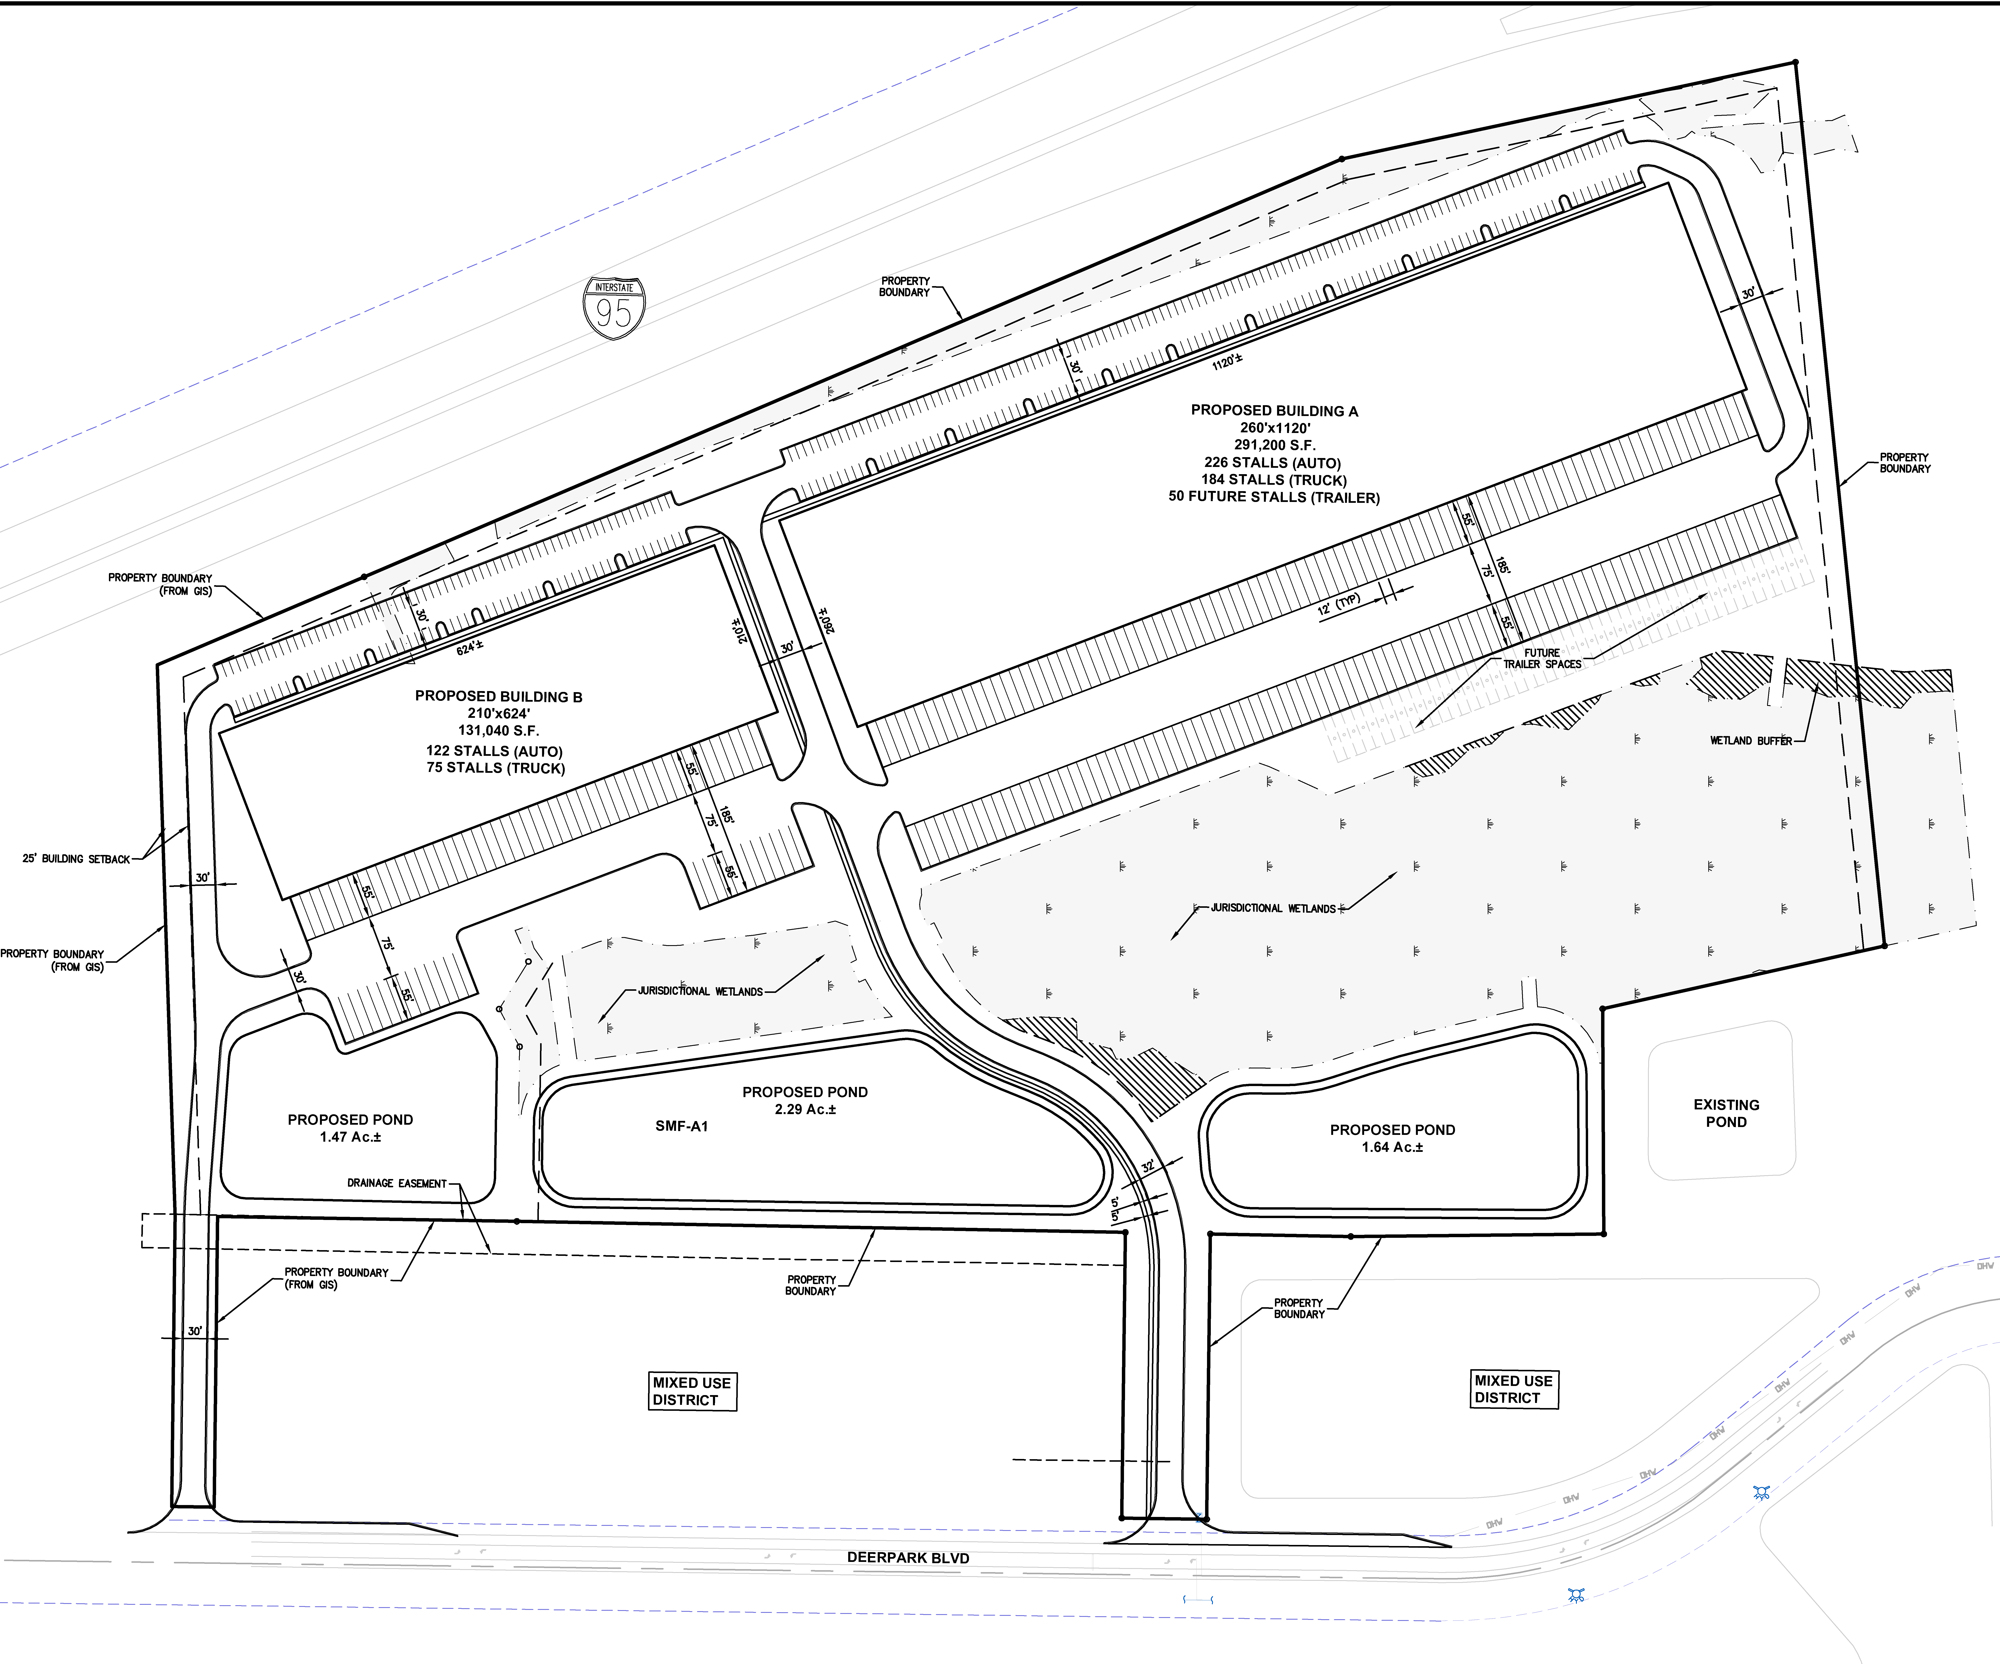 The site plan for the park at 3800 Deerpark Blvd. in Elkton, north of Florida 207.